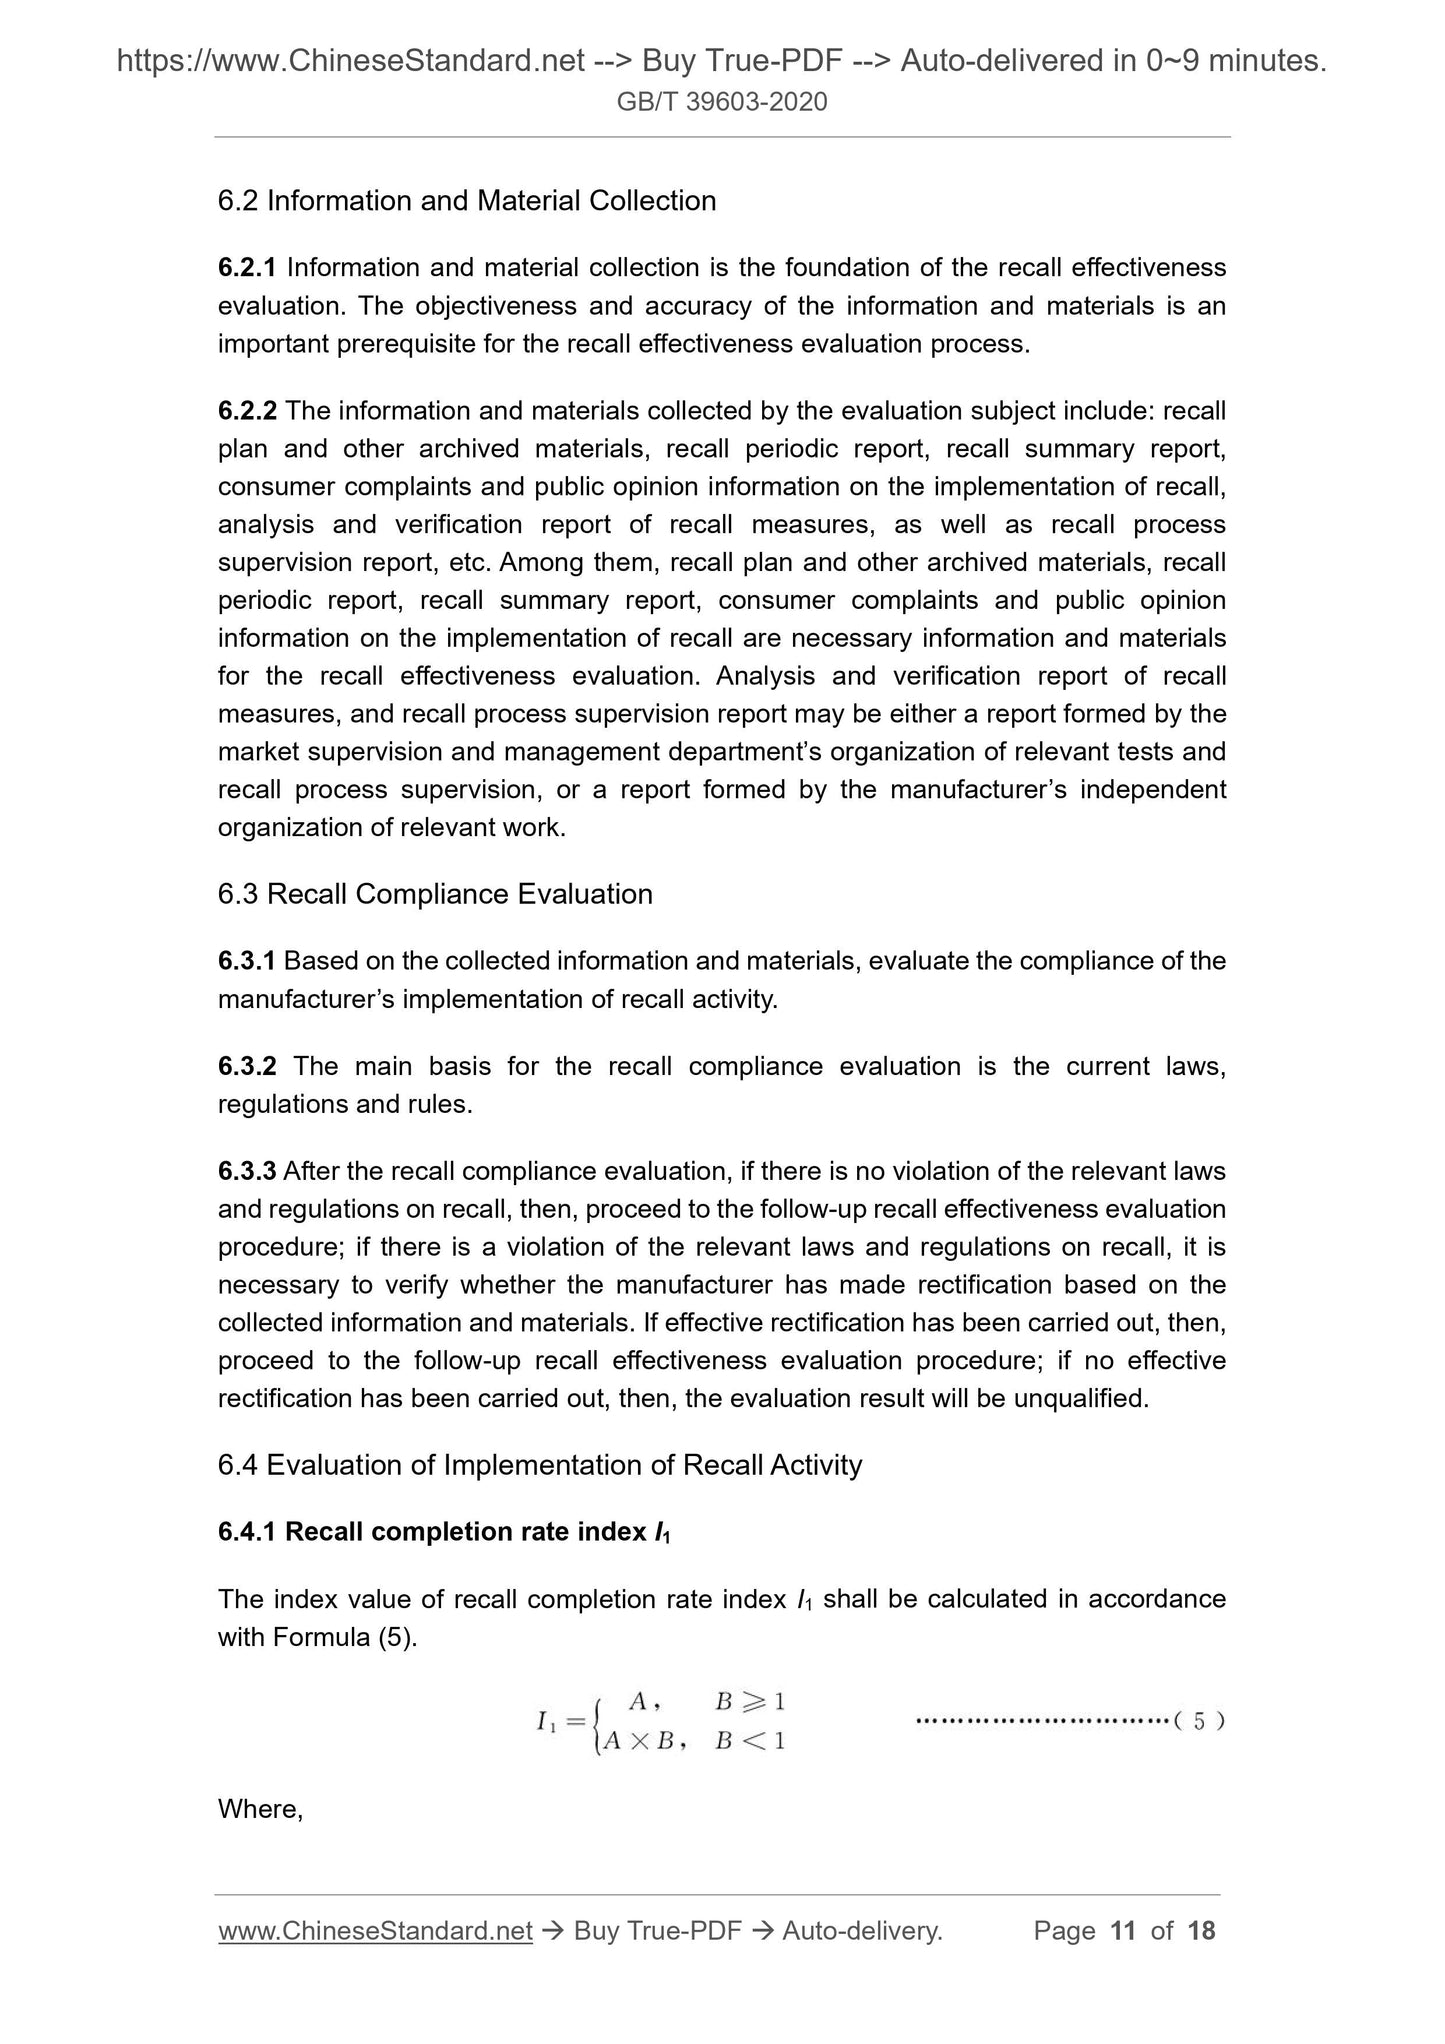 GB/T 39603-2020 Page 5